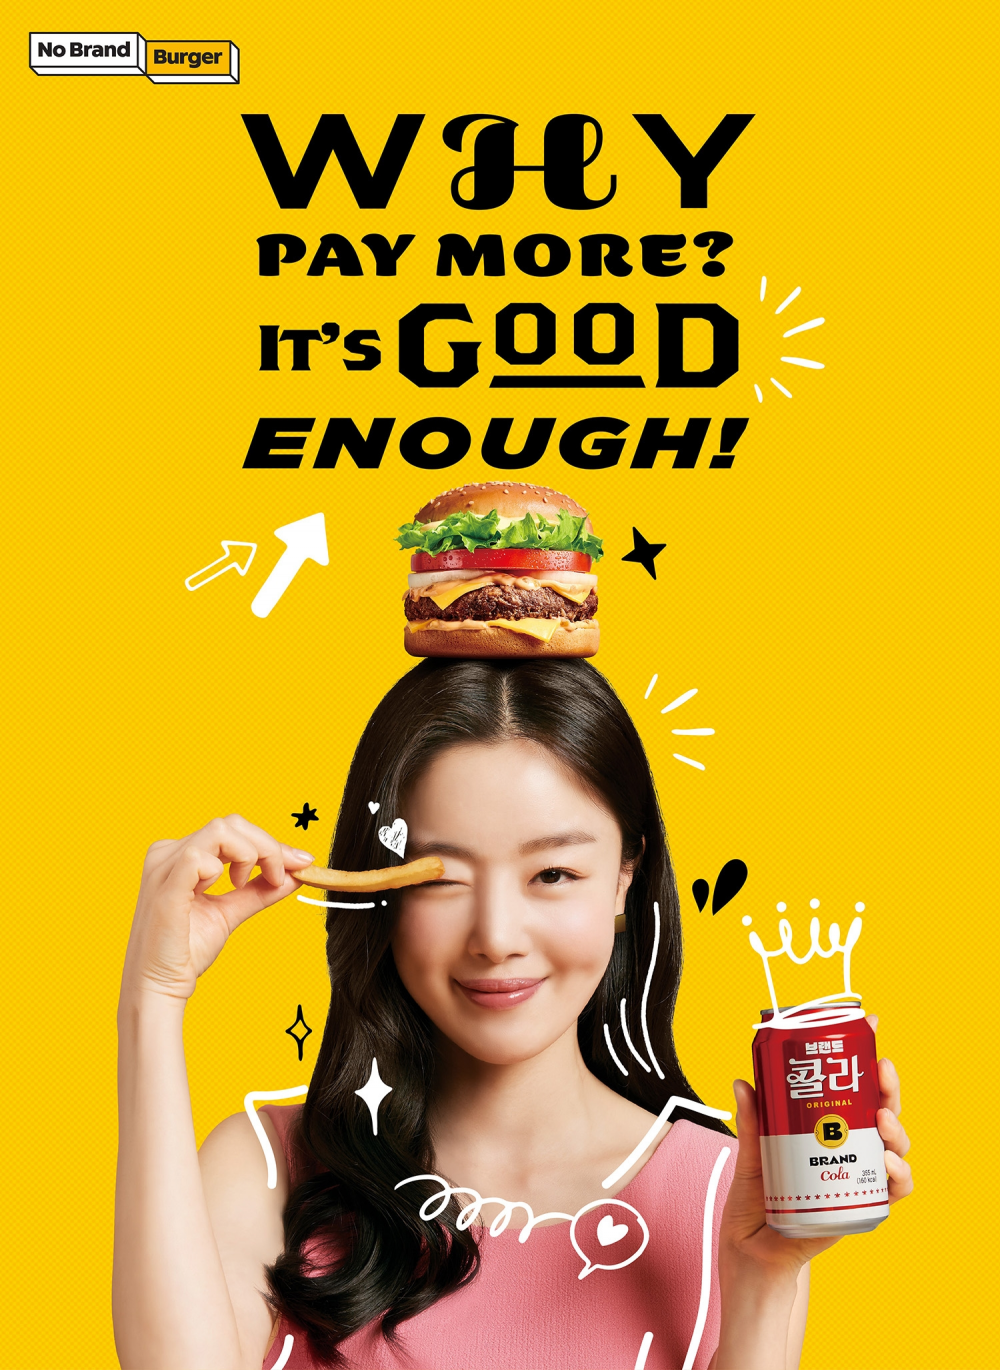 Han Sun Hwa selected as the new exclusive brand model for 'No Brand Burger